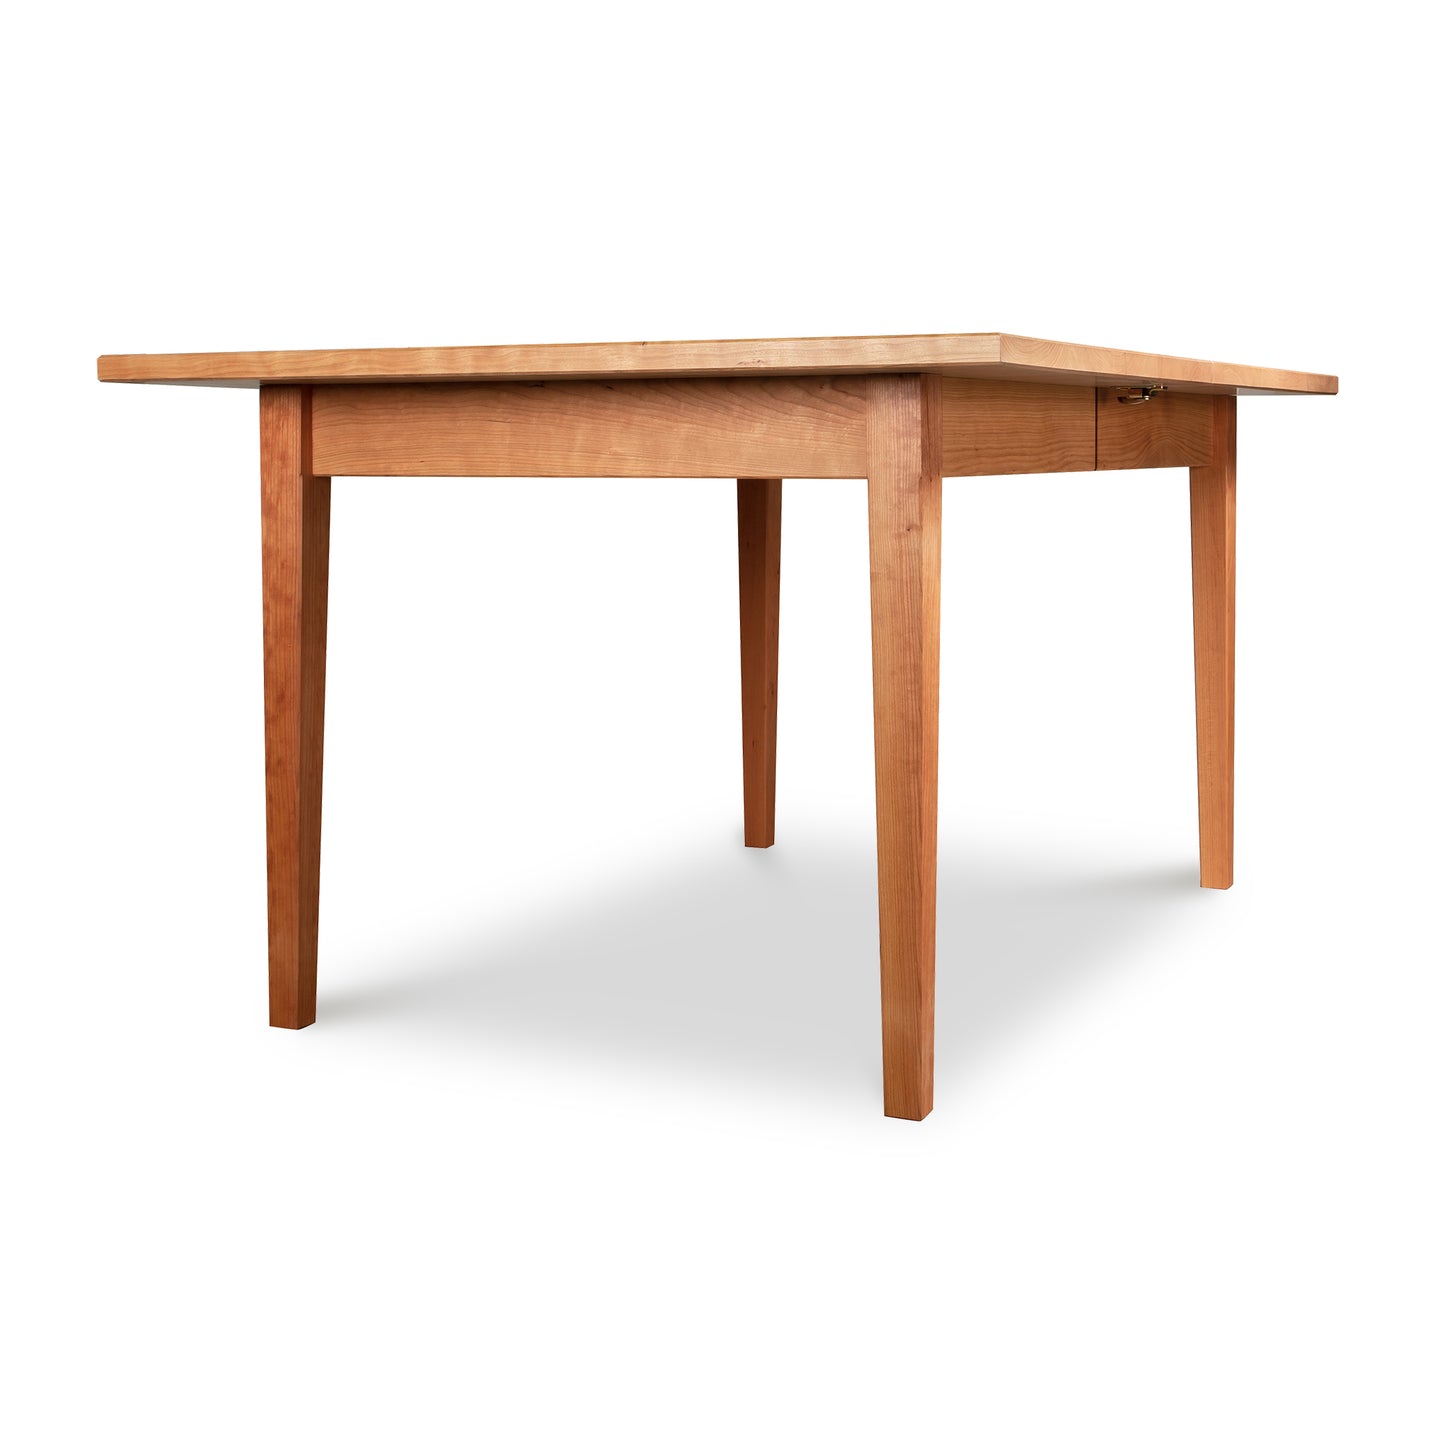 A Maple Corner Woodworks Vermont Shaker Rectangular Extension Dining Table with a rectangular top and four sturdy legs, featuring a single drawer on one side. The table is set against a white background.